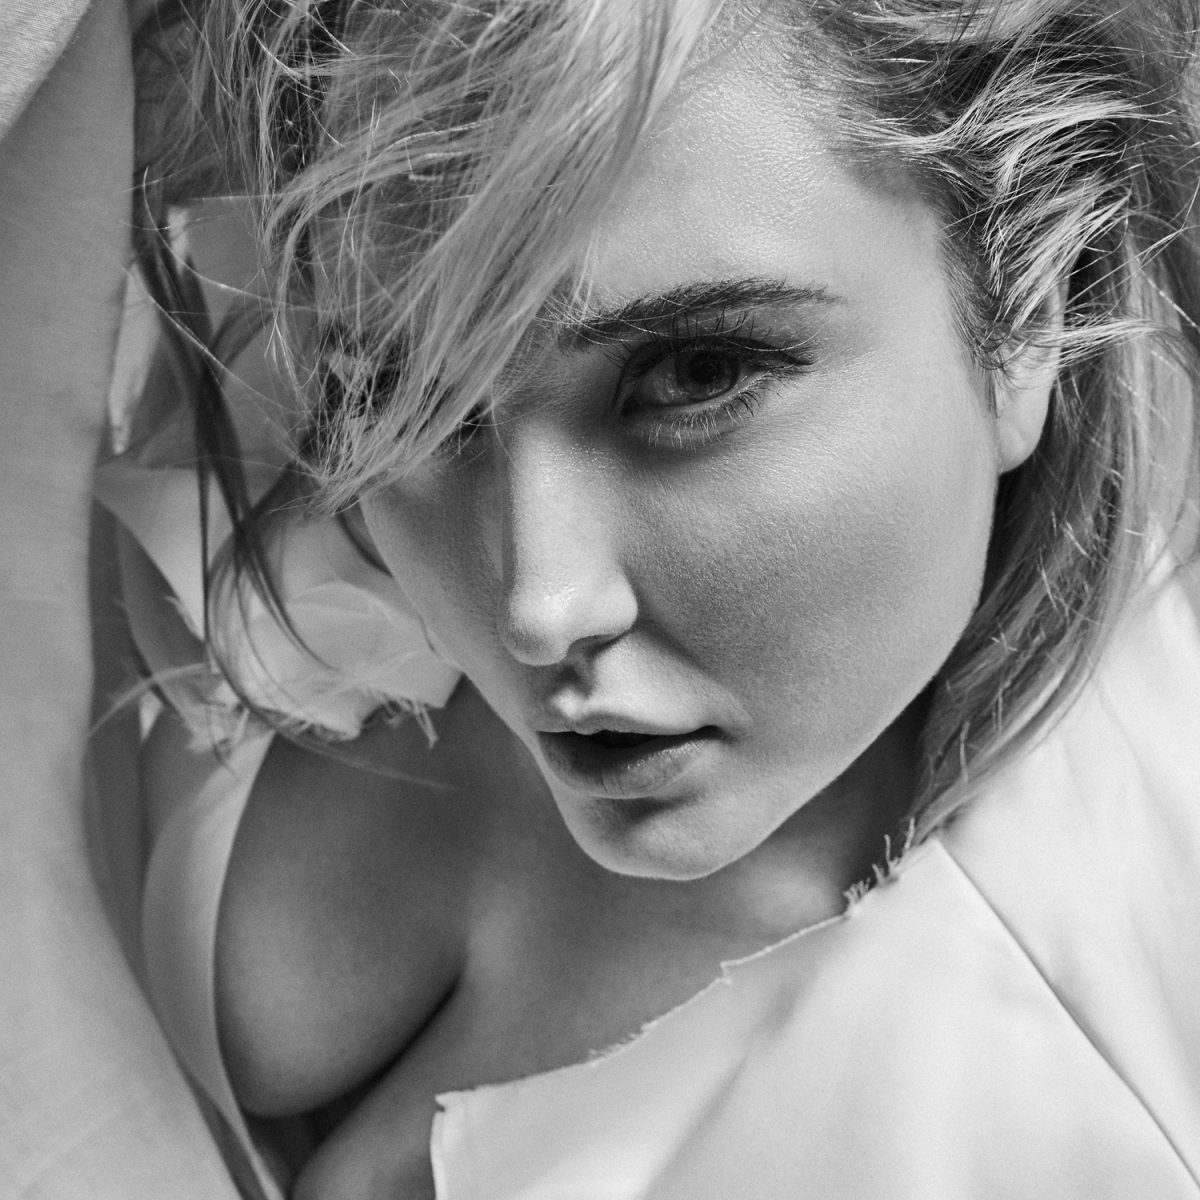 EXCLUSIVE INTERVIEW HAYLEY HASSELHOFF ON BODY POSITIVITY, MENTAL HEALTH AWARENESS, AND HER JOURNEY AS CURVE MODEL AND ACTIVIST THE UNTITLED MAGAZINE photo